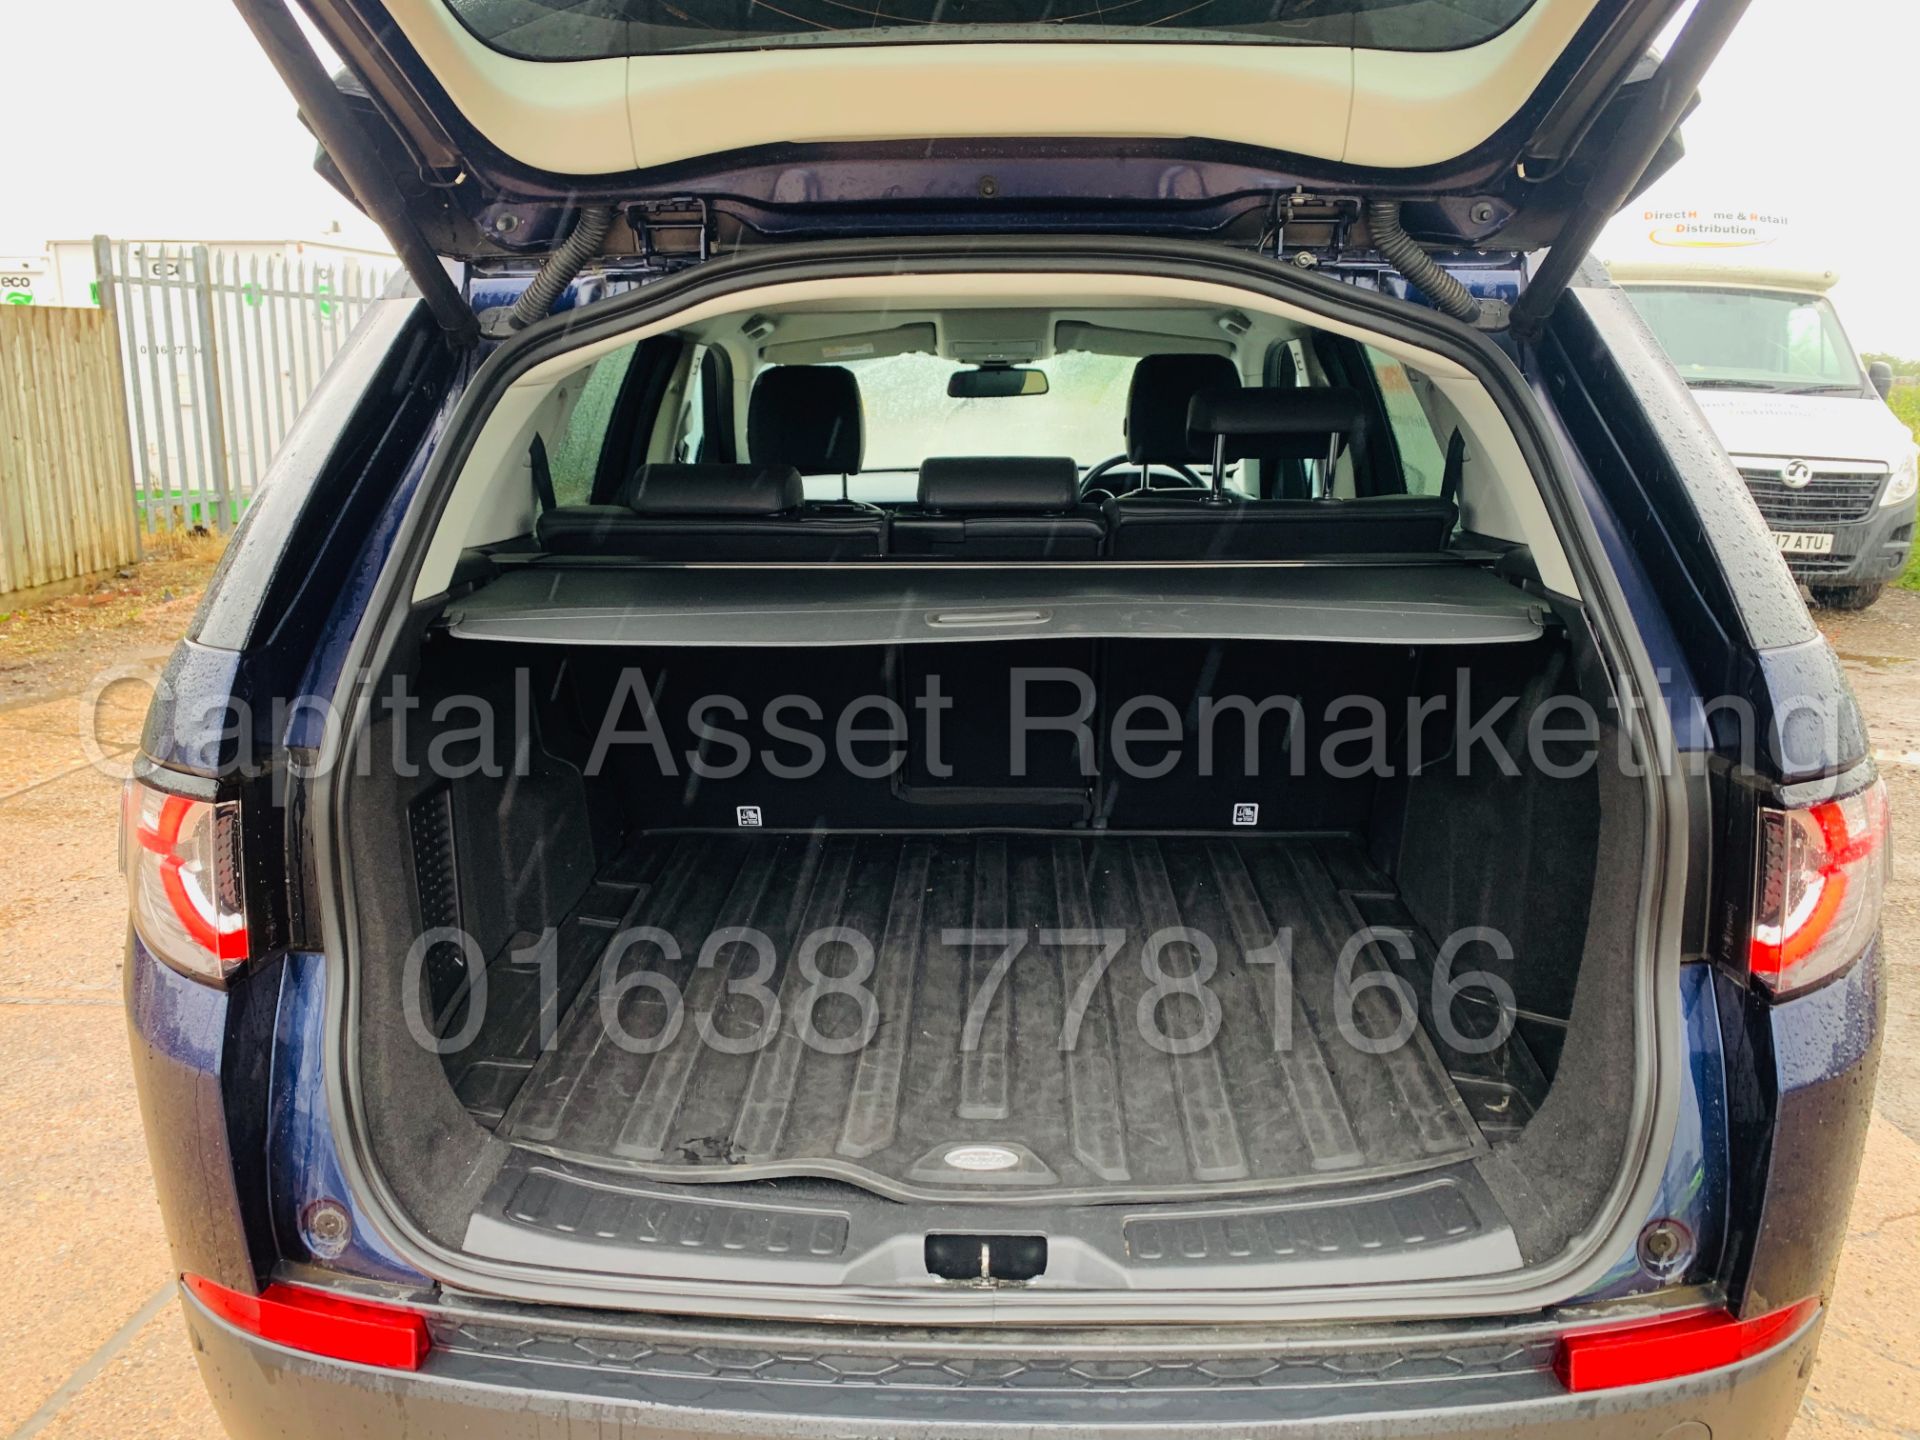 (On Sale) LAND ROVER DISCOVERY SPORT *HSE LUXURY* SUV (66 REG) '2.0 TD4 -180 BHP- AUTO' *TOP SPEC* - Image 30 of 63